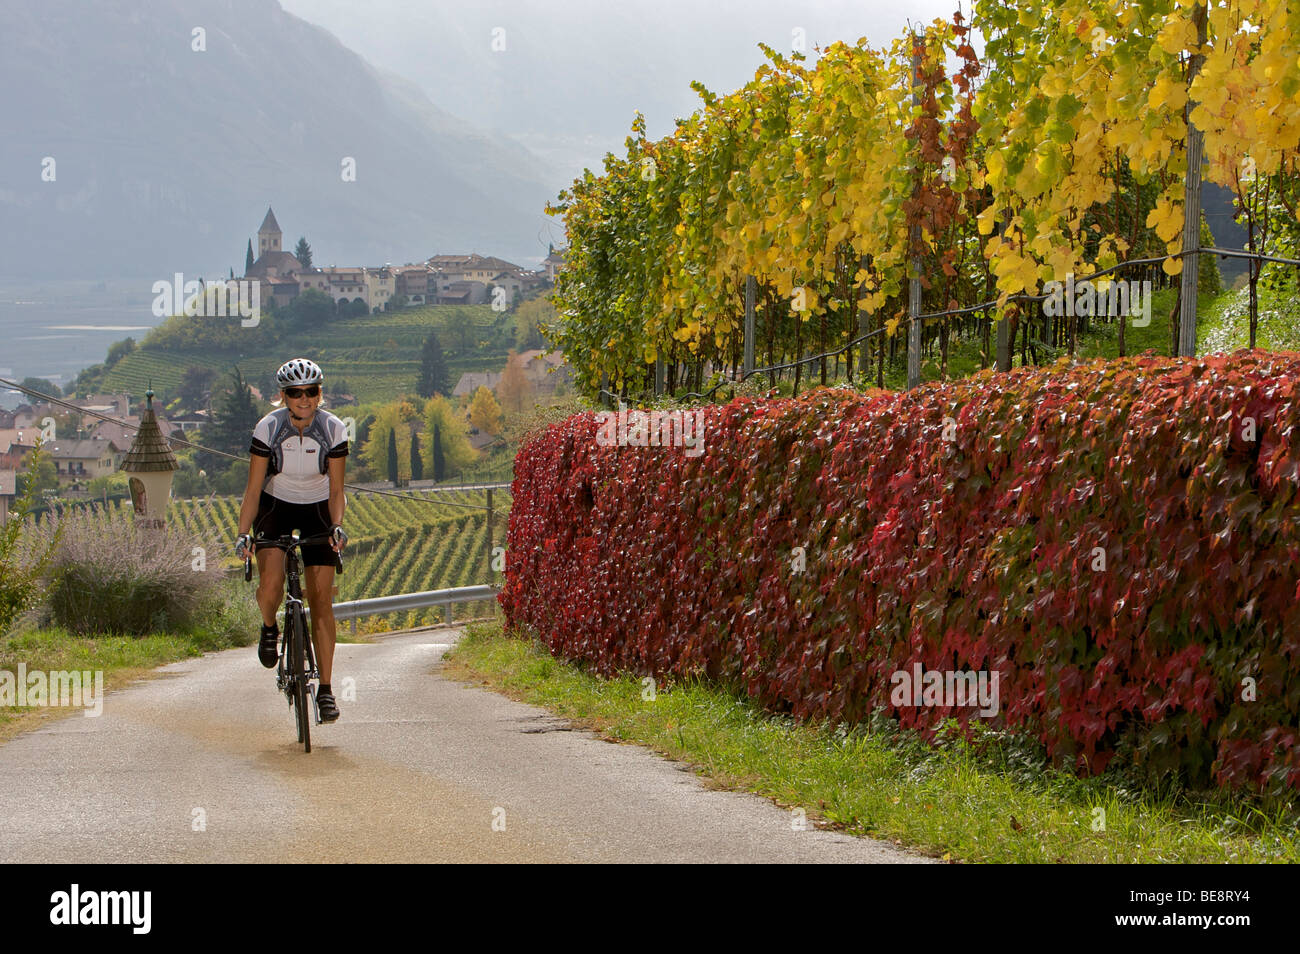 Bicycle racer on the Wine Road near Tramin, Caldaro, South Tyrol, Italy, Europe Stock Photo